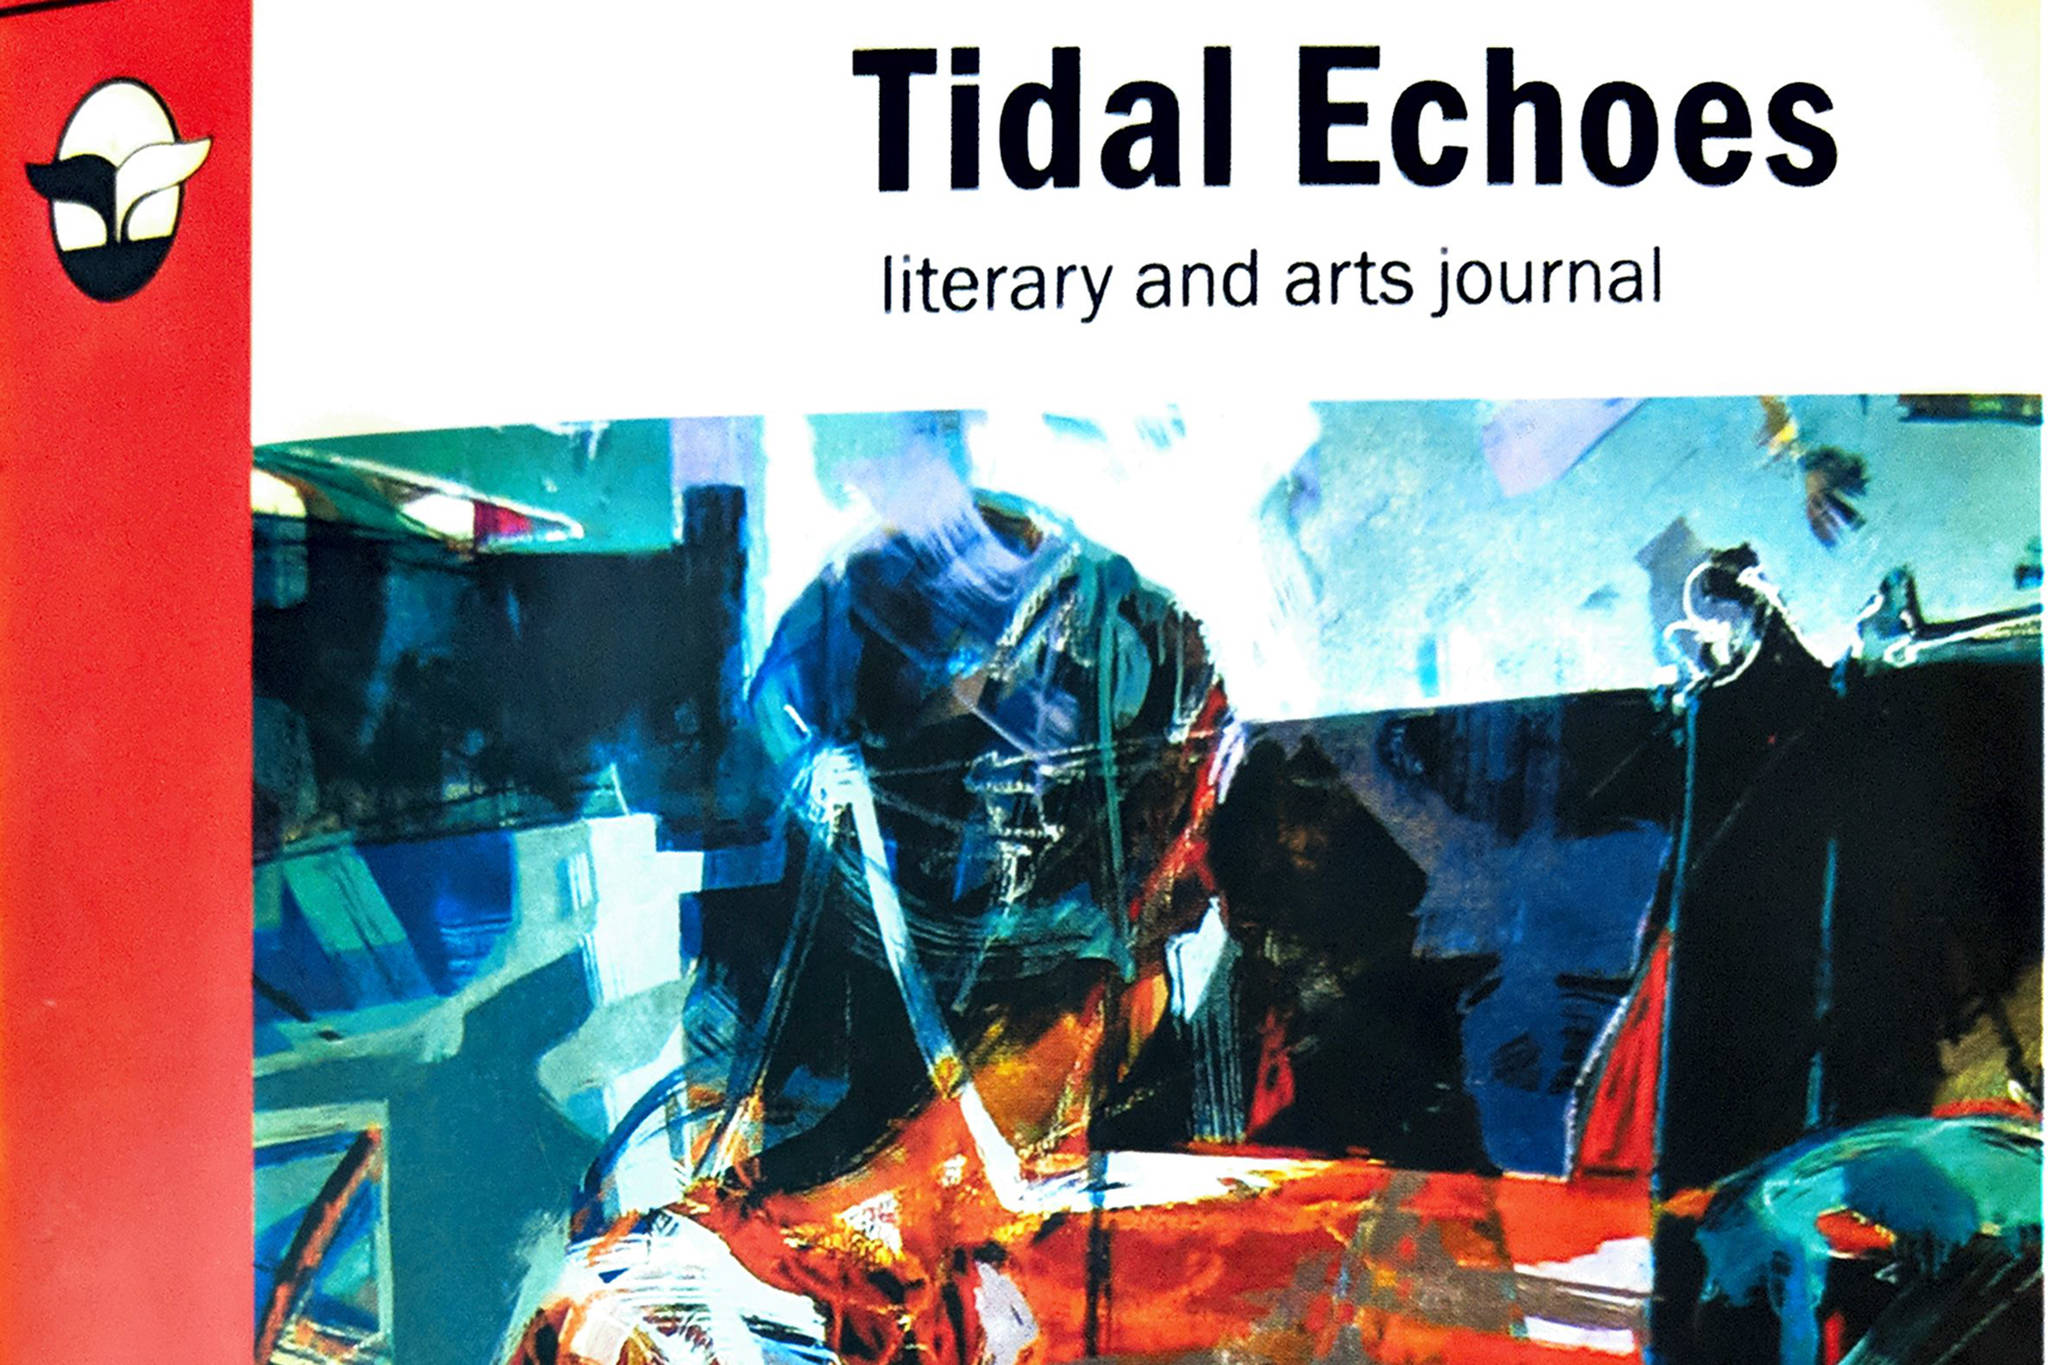 More prose, please: Tidal Echoes seeks submissions